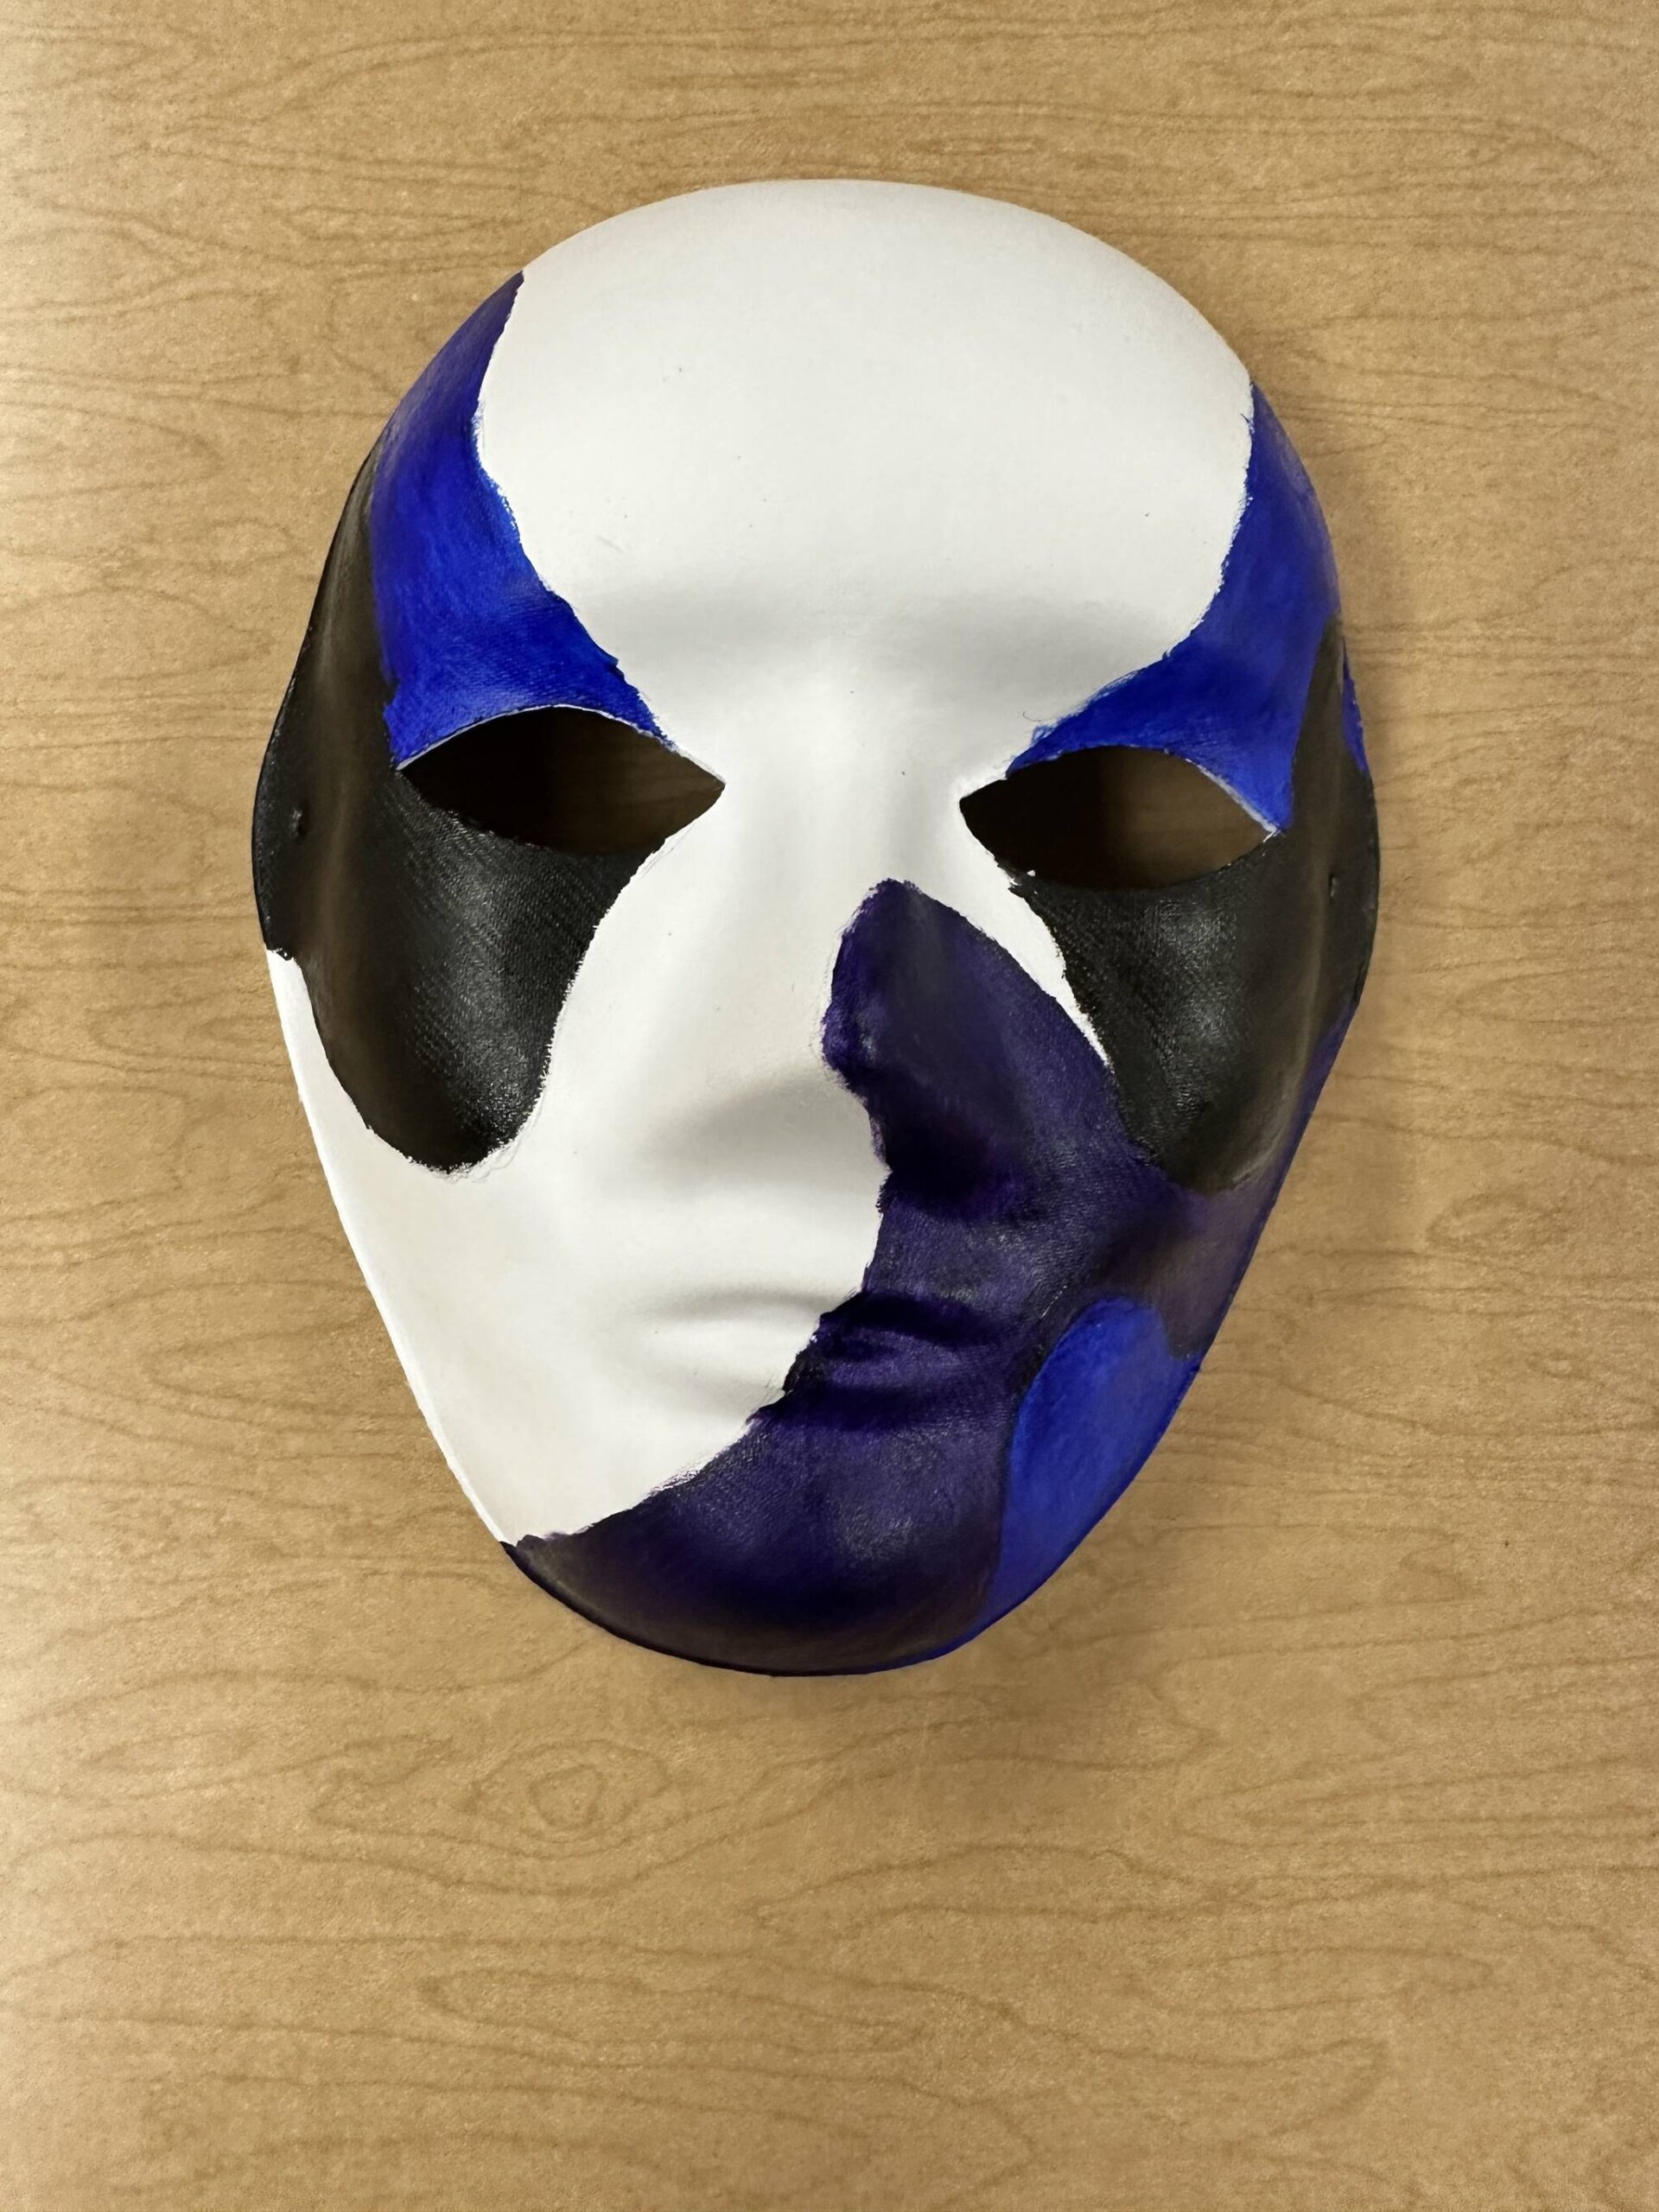 Photo provided
After receiving some bad news, a student said he felt numb. After being asked what color “numb” looks like, he painted this mask.